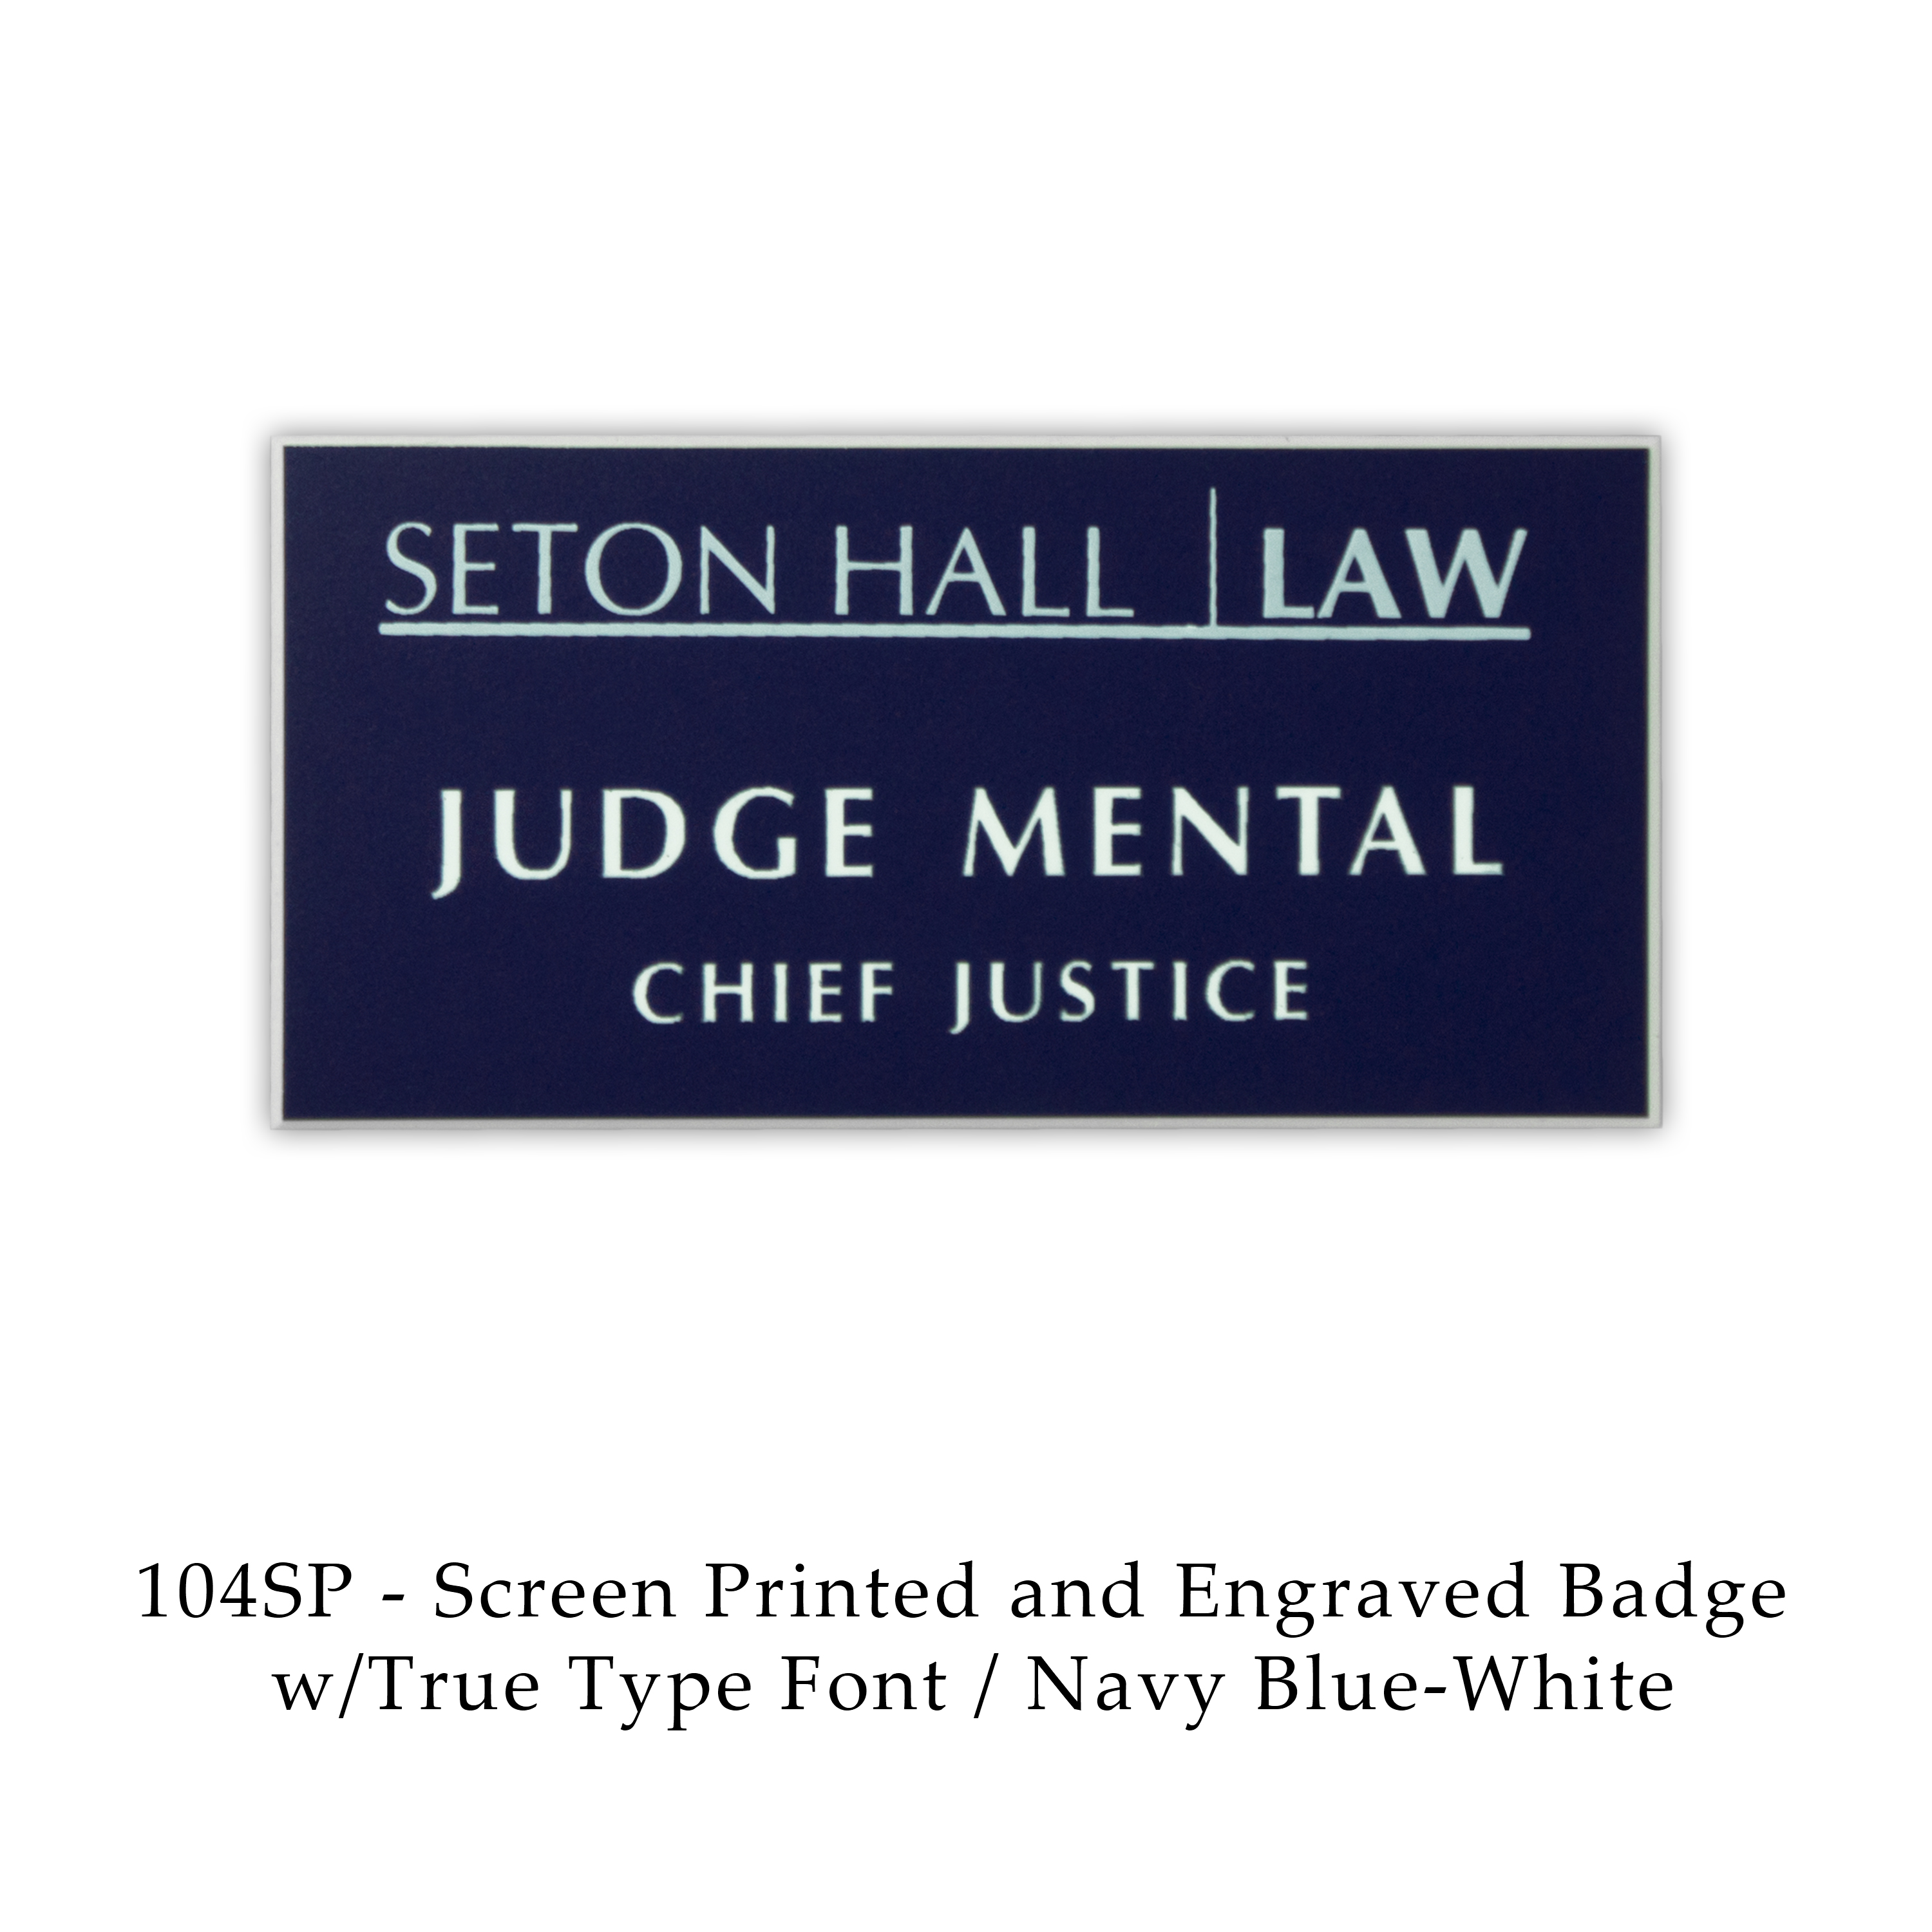 Seton Hall Law 104SP Badge and Sign Store